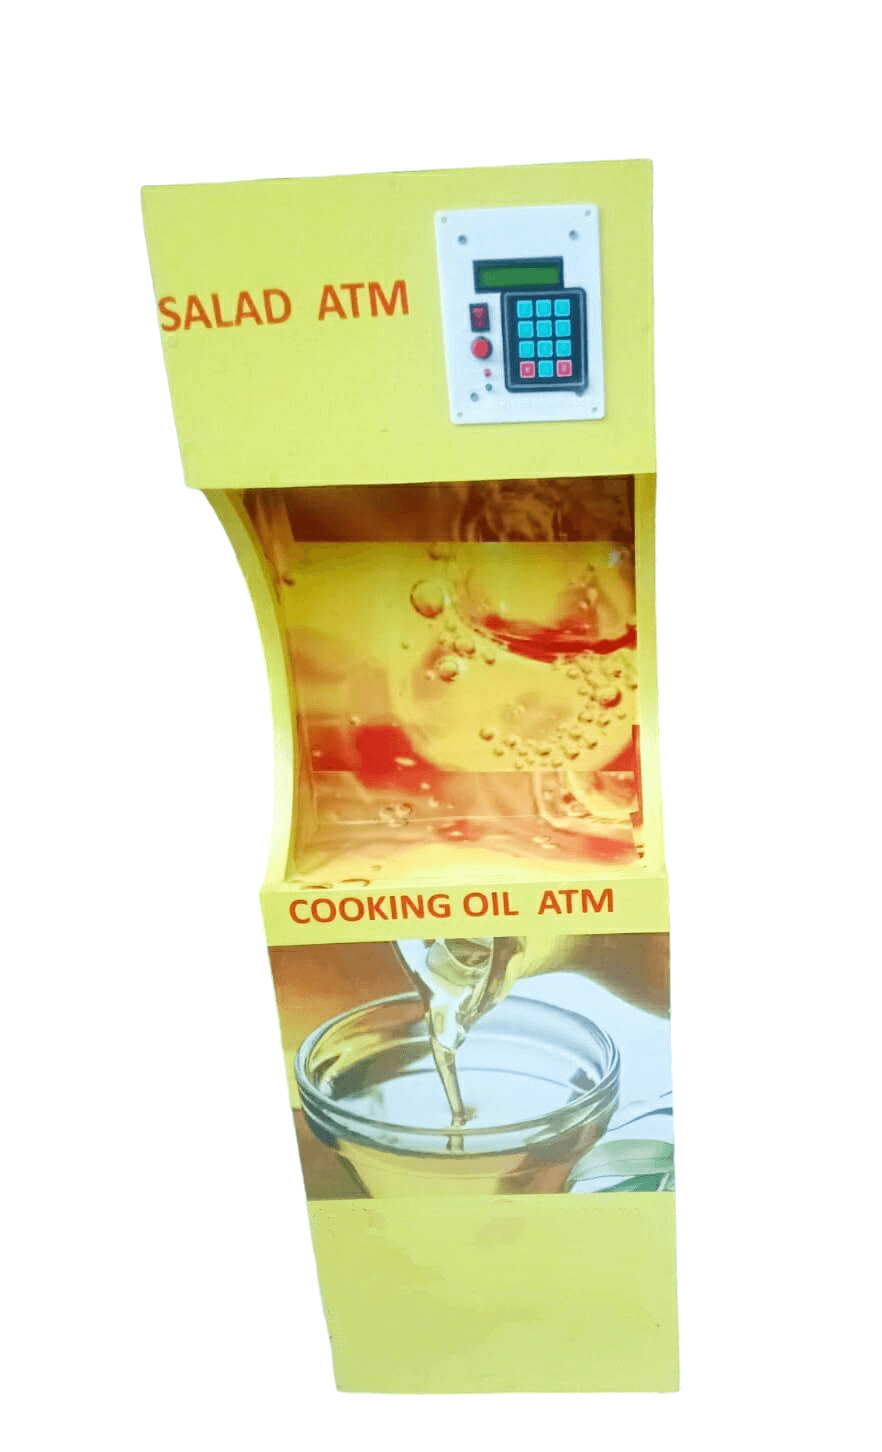 50 Litres cooking oil ATM machine